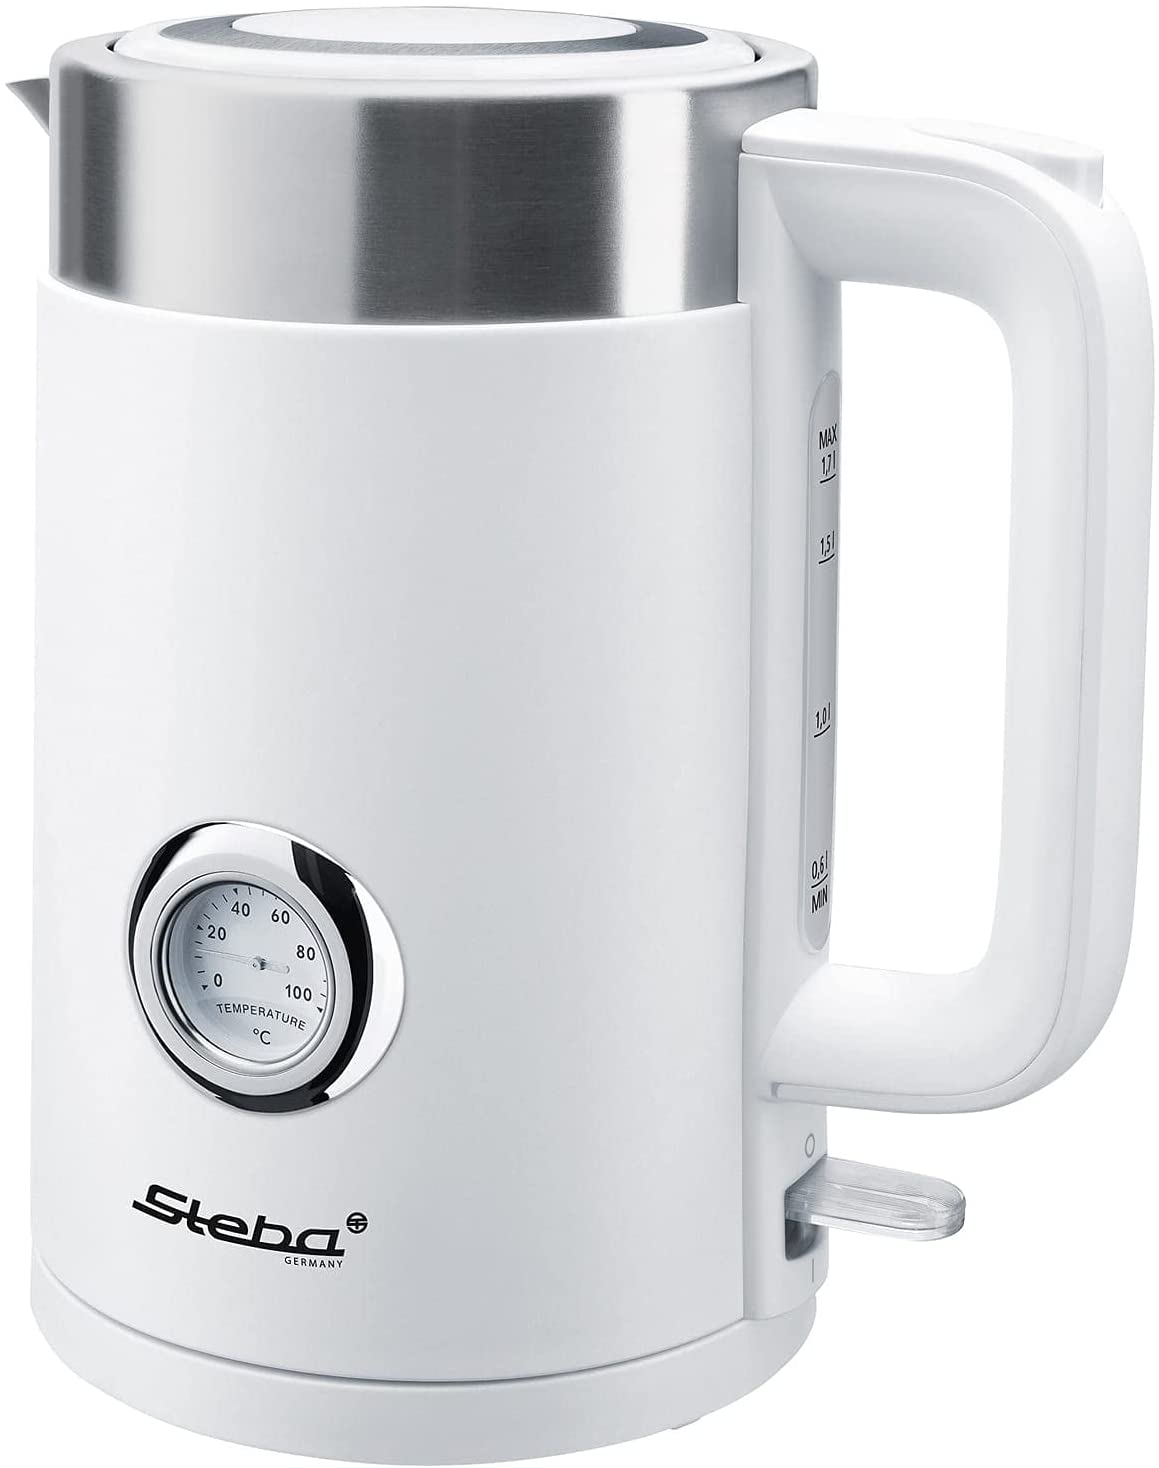 Steba Kettle WK 10 Bianco | Double-walled housing (stainless steel interior, plastic exterior) with thermal function | 1.7 litre capacity | Temperature display up to 100 °C | Easy lid opening